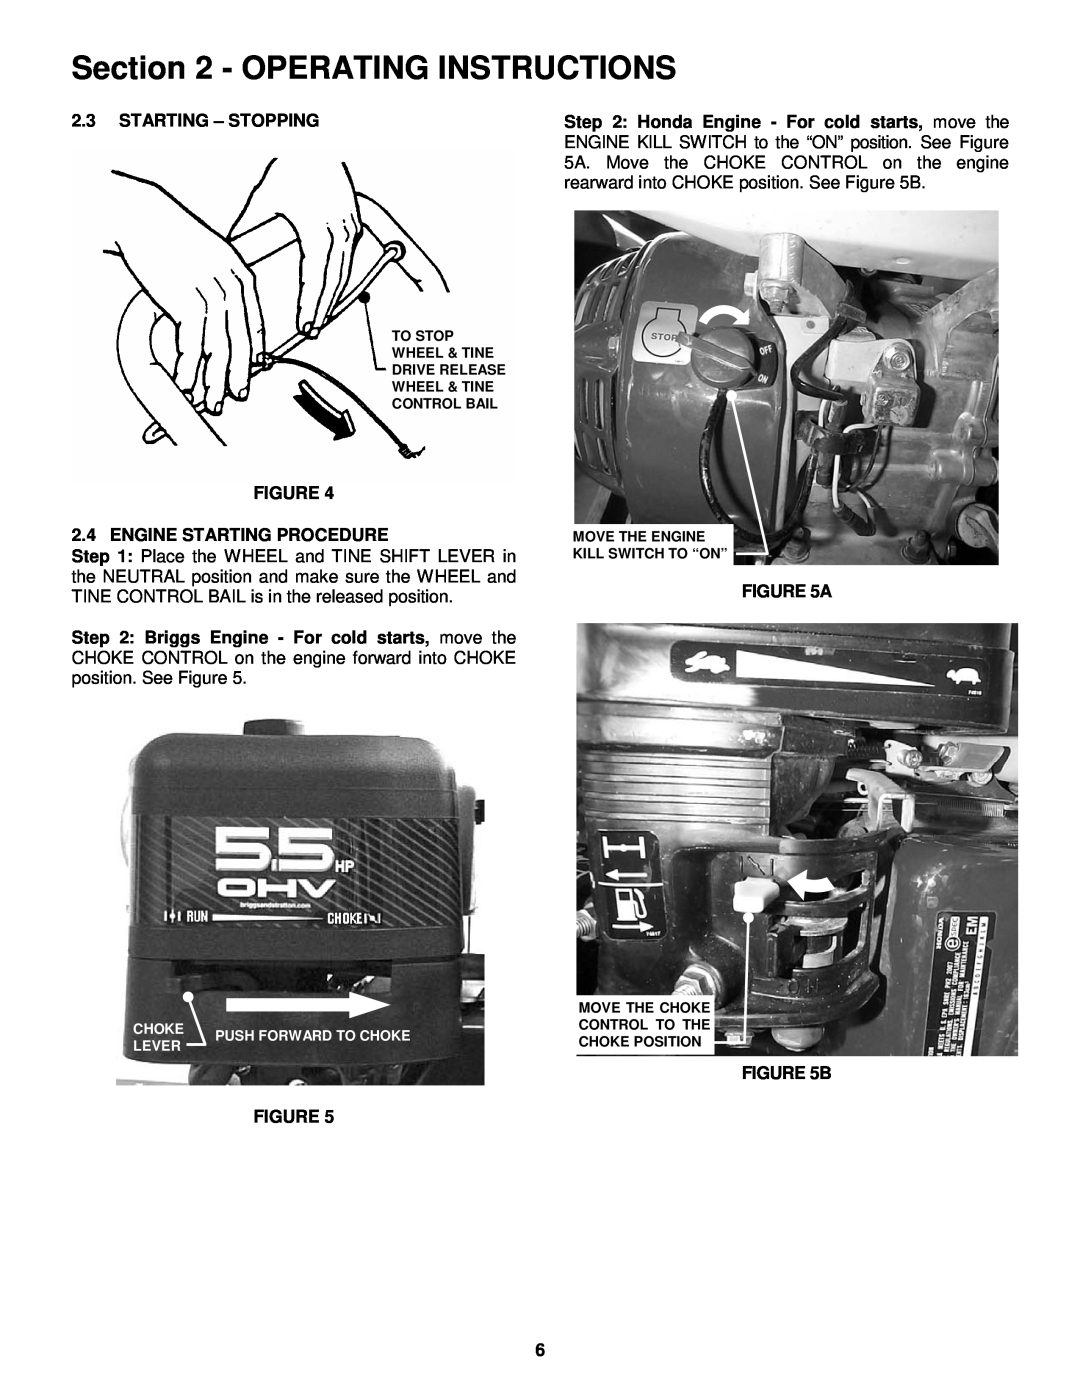 Snapper ICFR7005BV, CICFR5505HV important safety instructions Operating Instructions, Starting – Stopping 